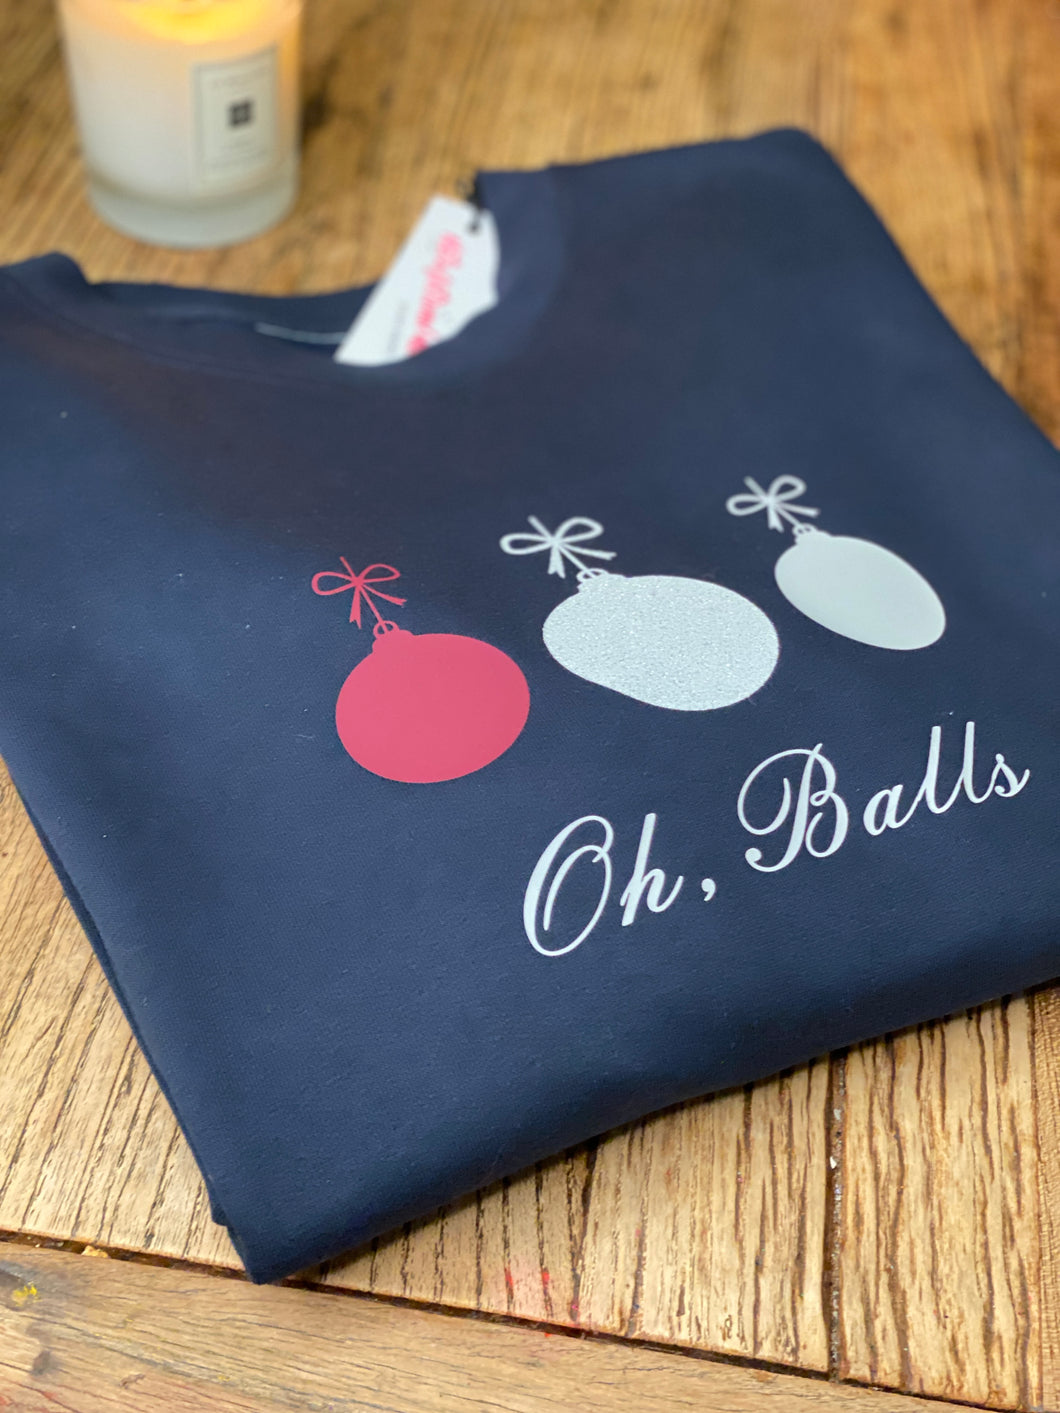 Oh-balls-charity-christmas-jumper-male-christmas-jumper